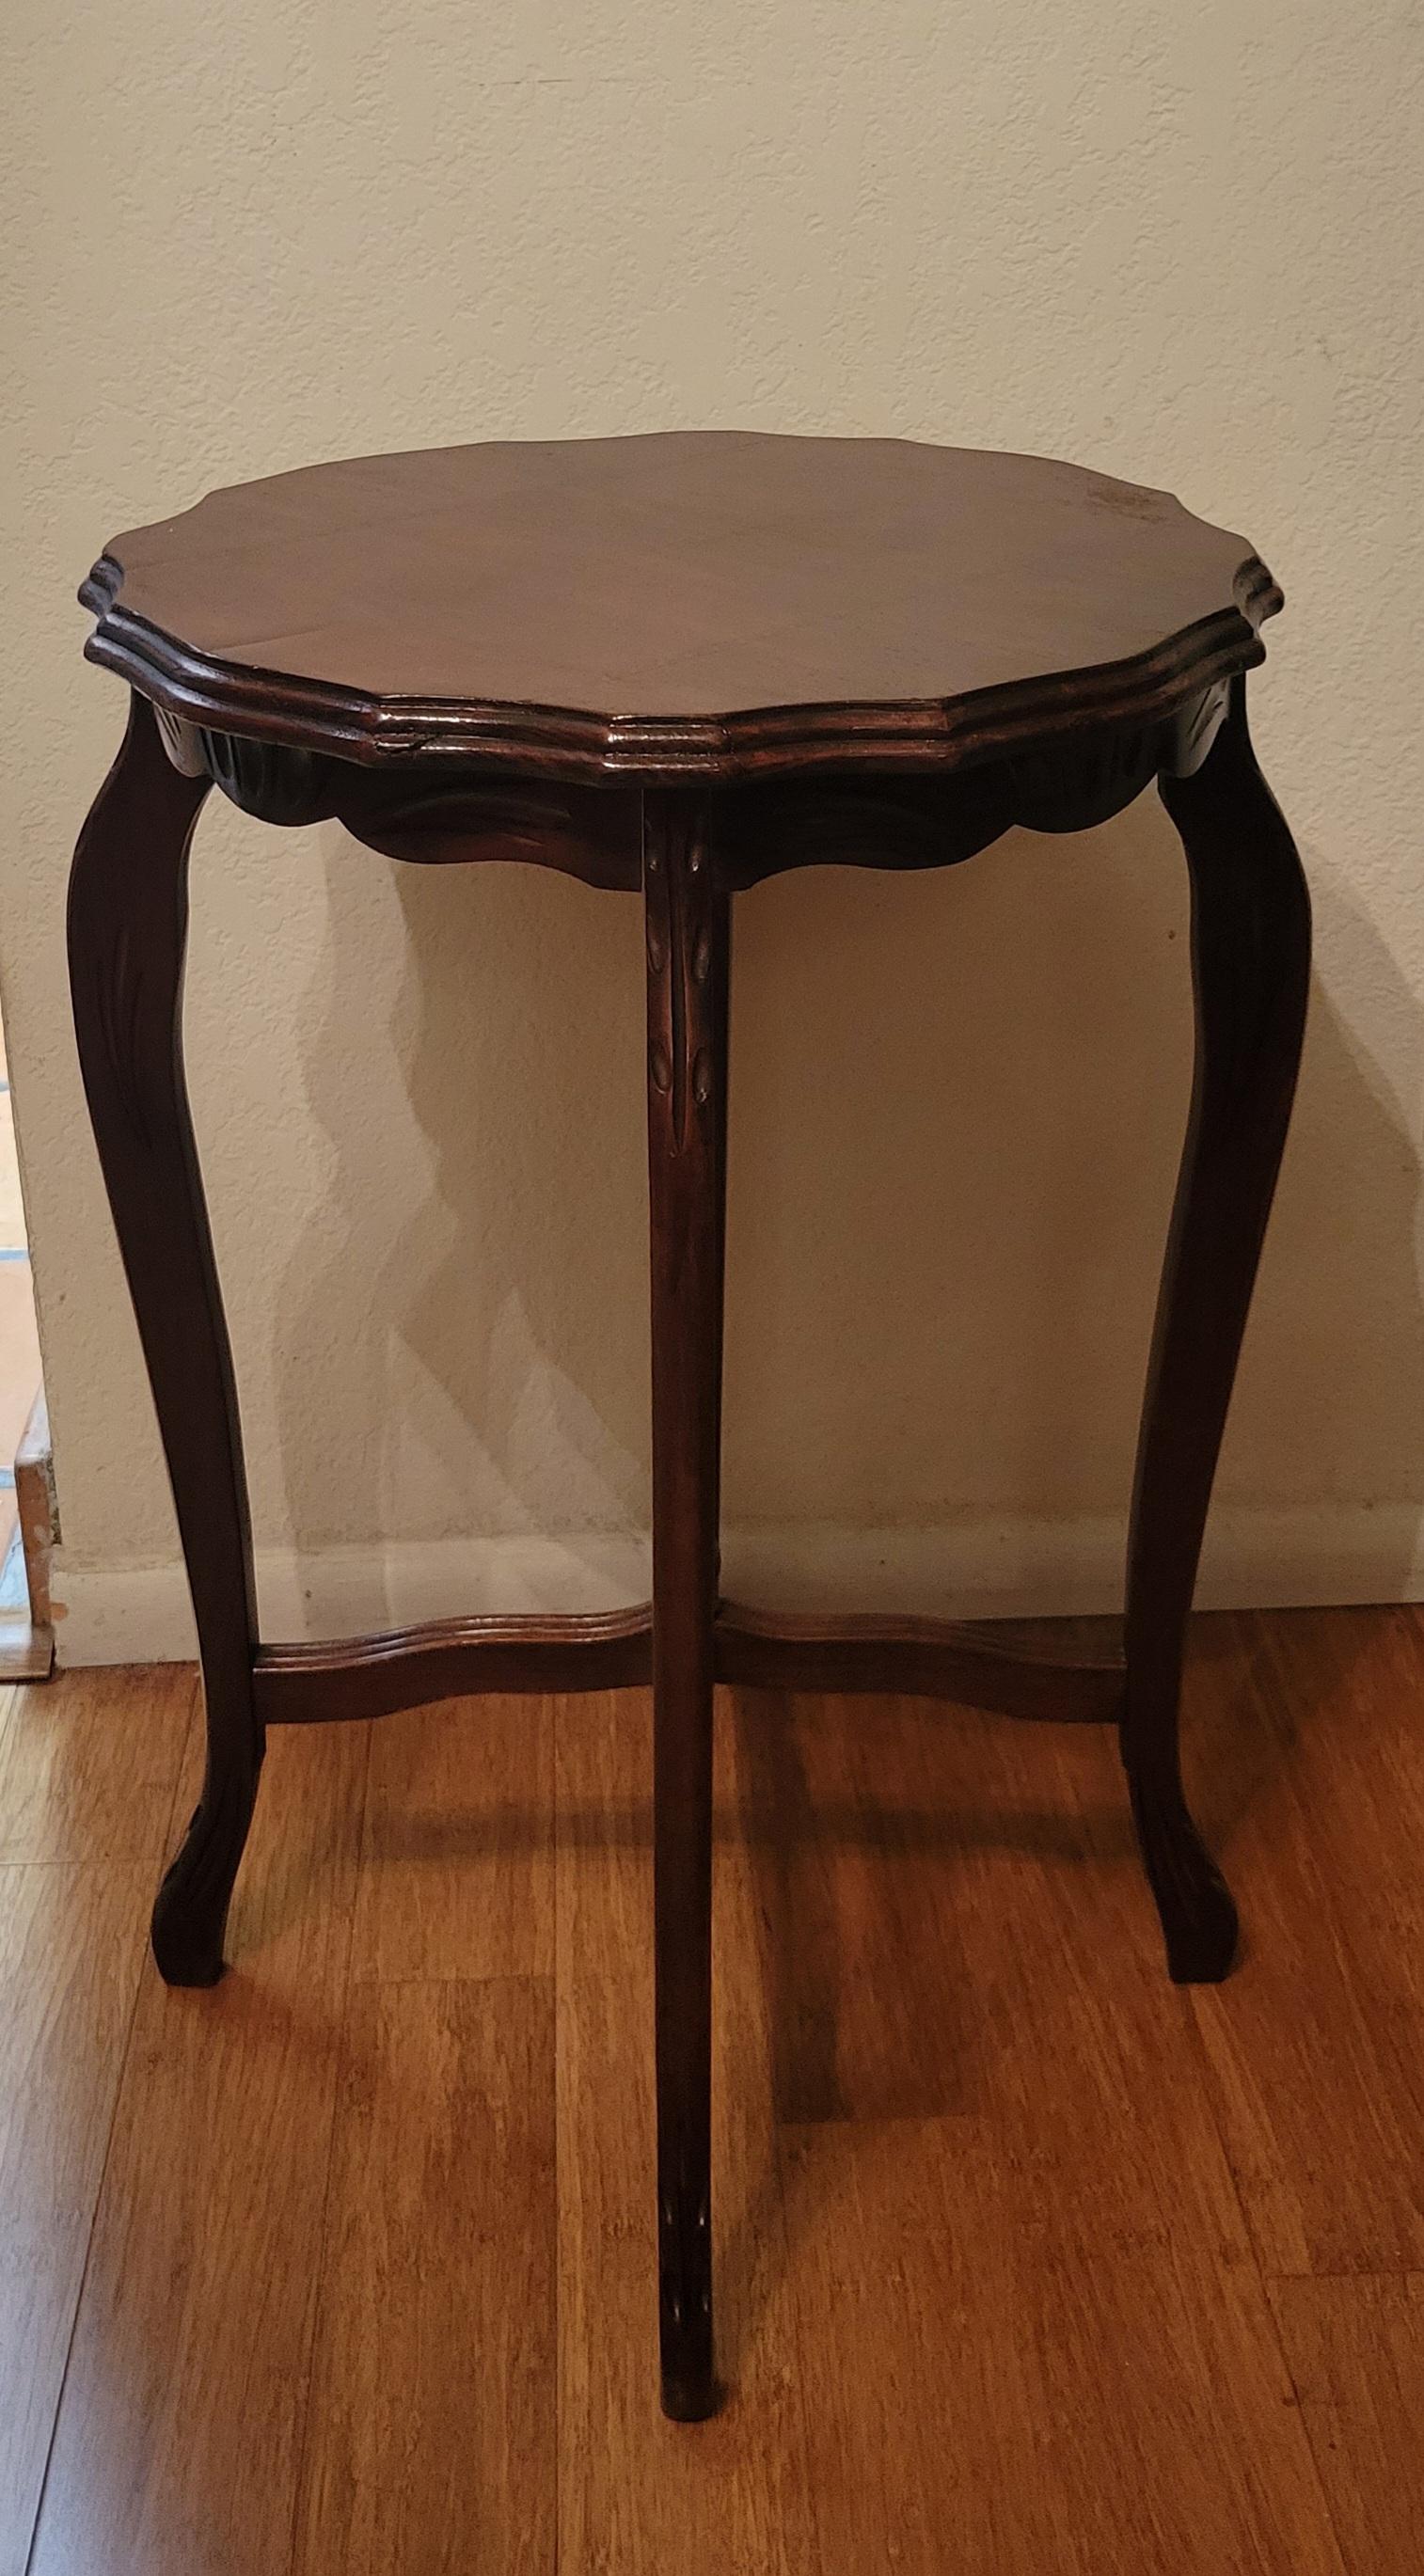 Antique, circa 1915-s Scalloped Edge Solid Wood Side Table In Good Condition For Sale In Phoenix, AZ